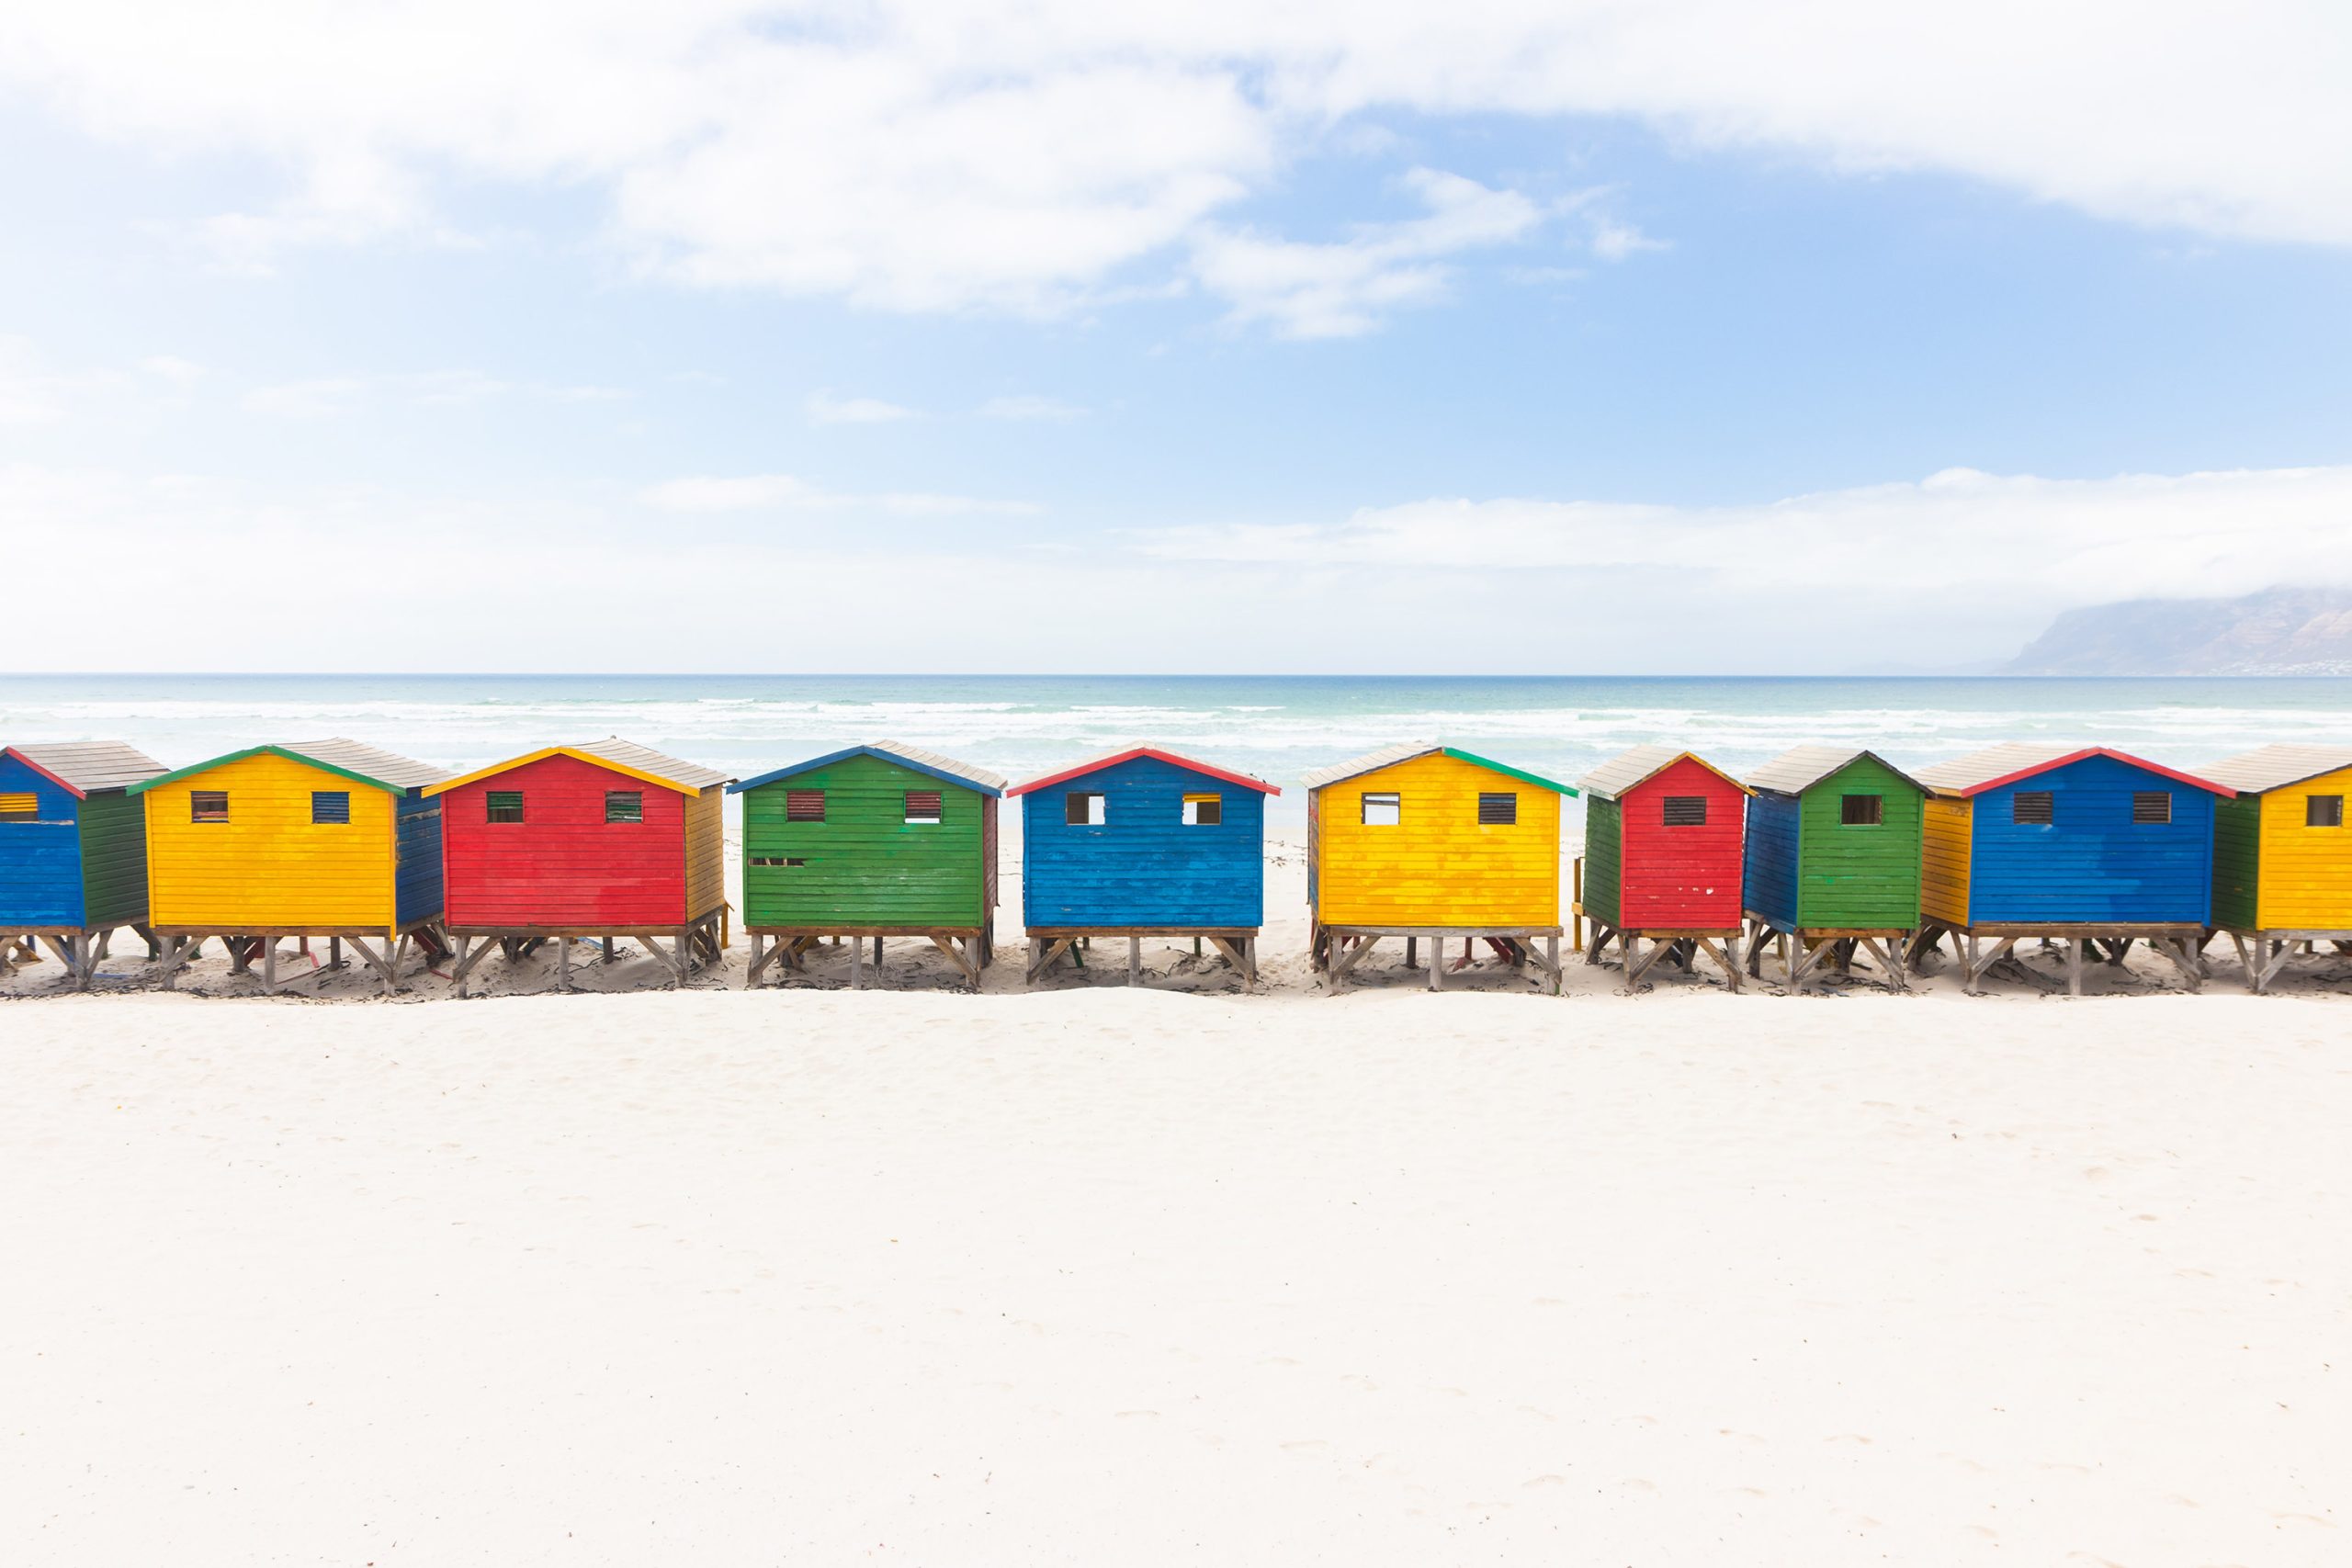 A row of colorful beach huts along one of the beaches in Cape Town